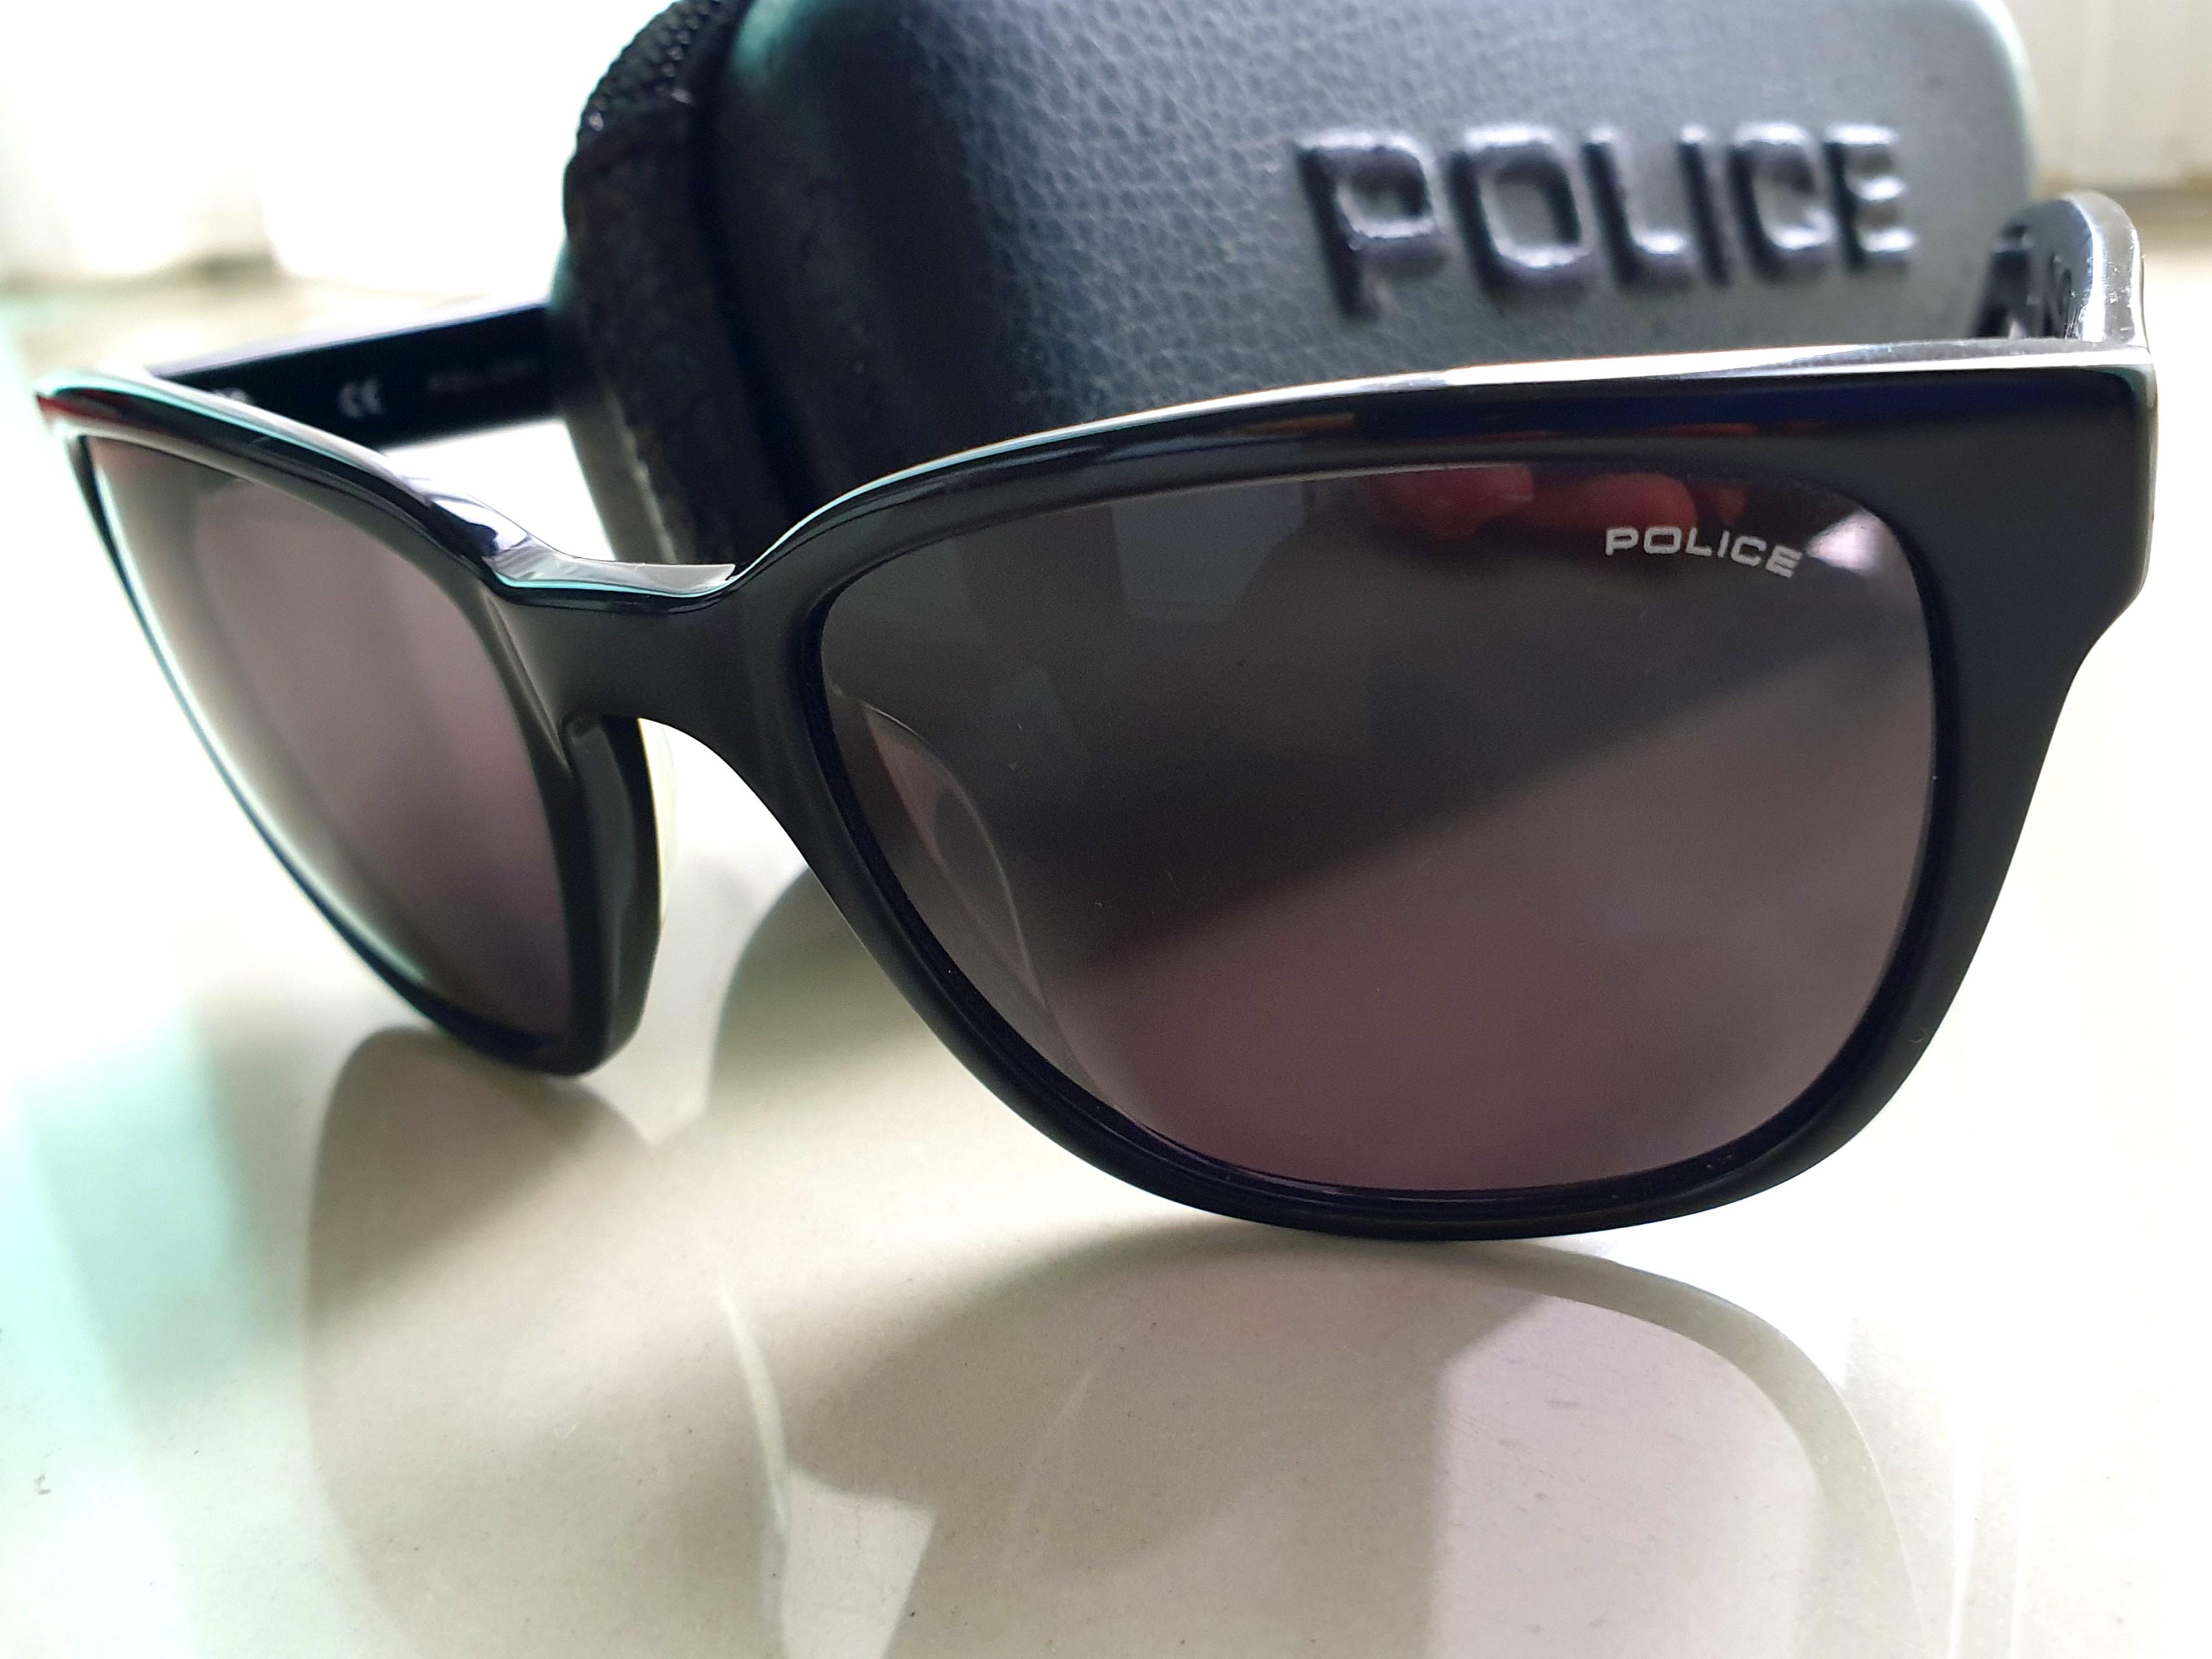 Authentic Police Sunglasses Women S Fashion Watches And Accessories Sunglasses And Eyewear On